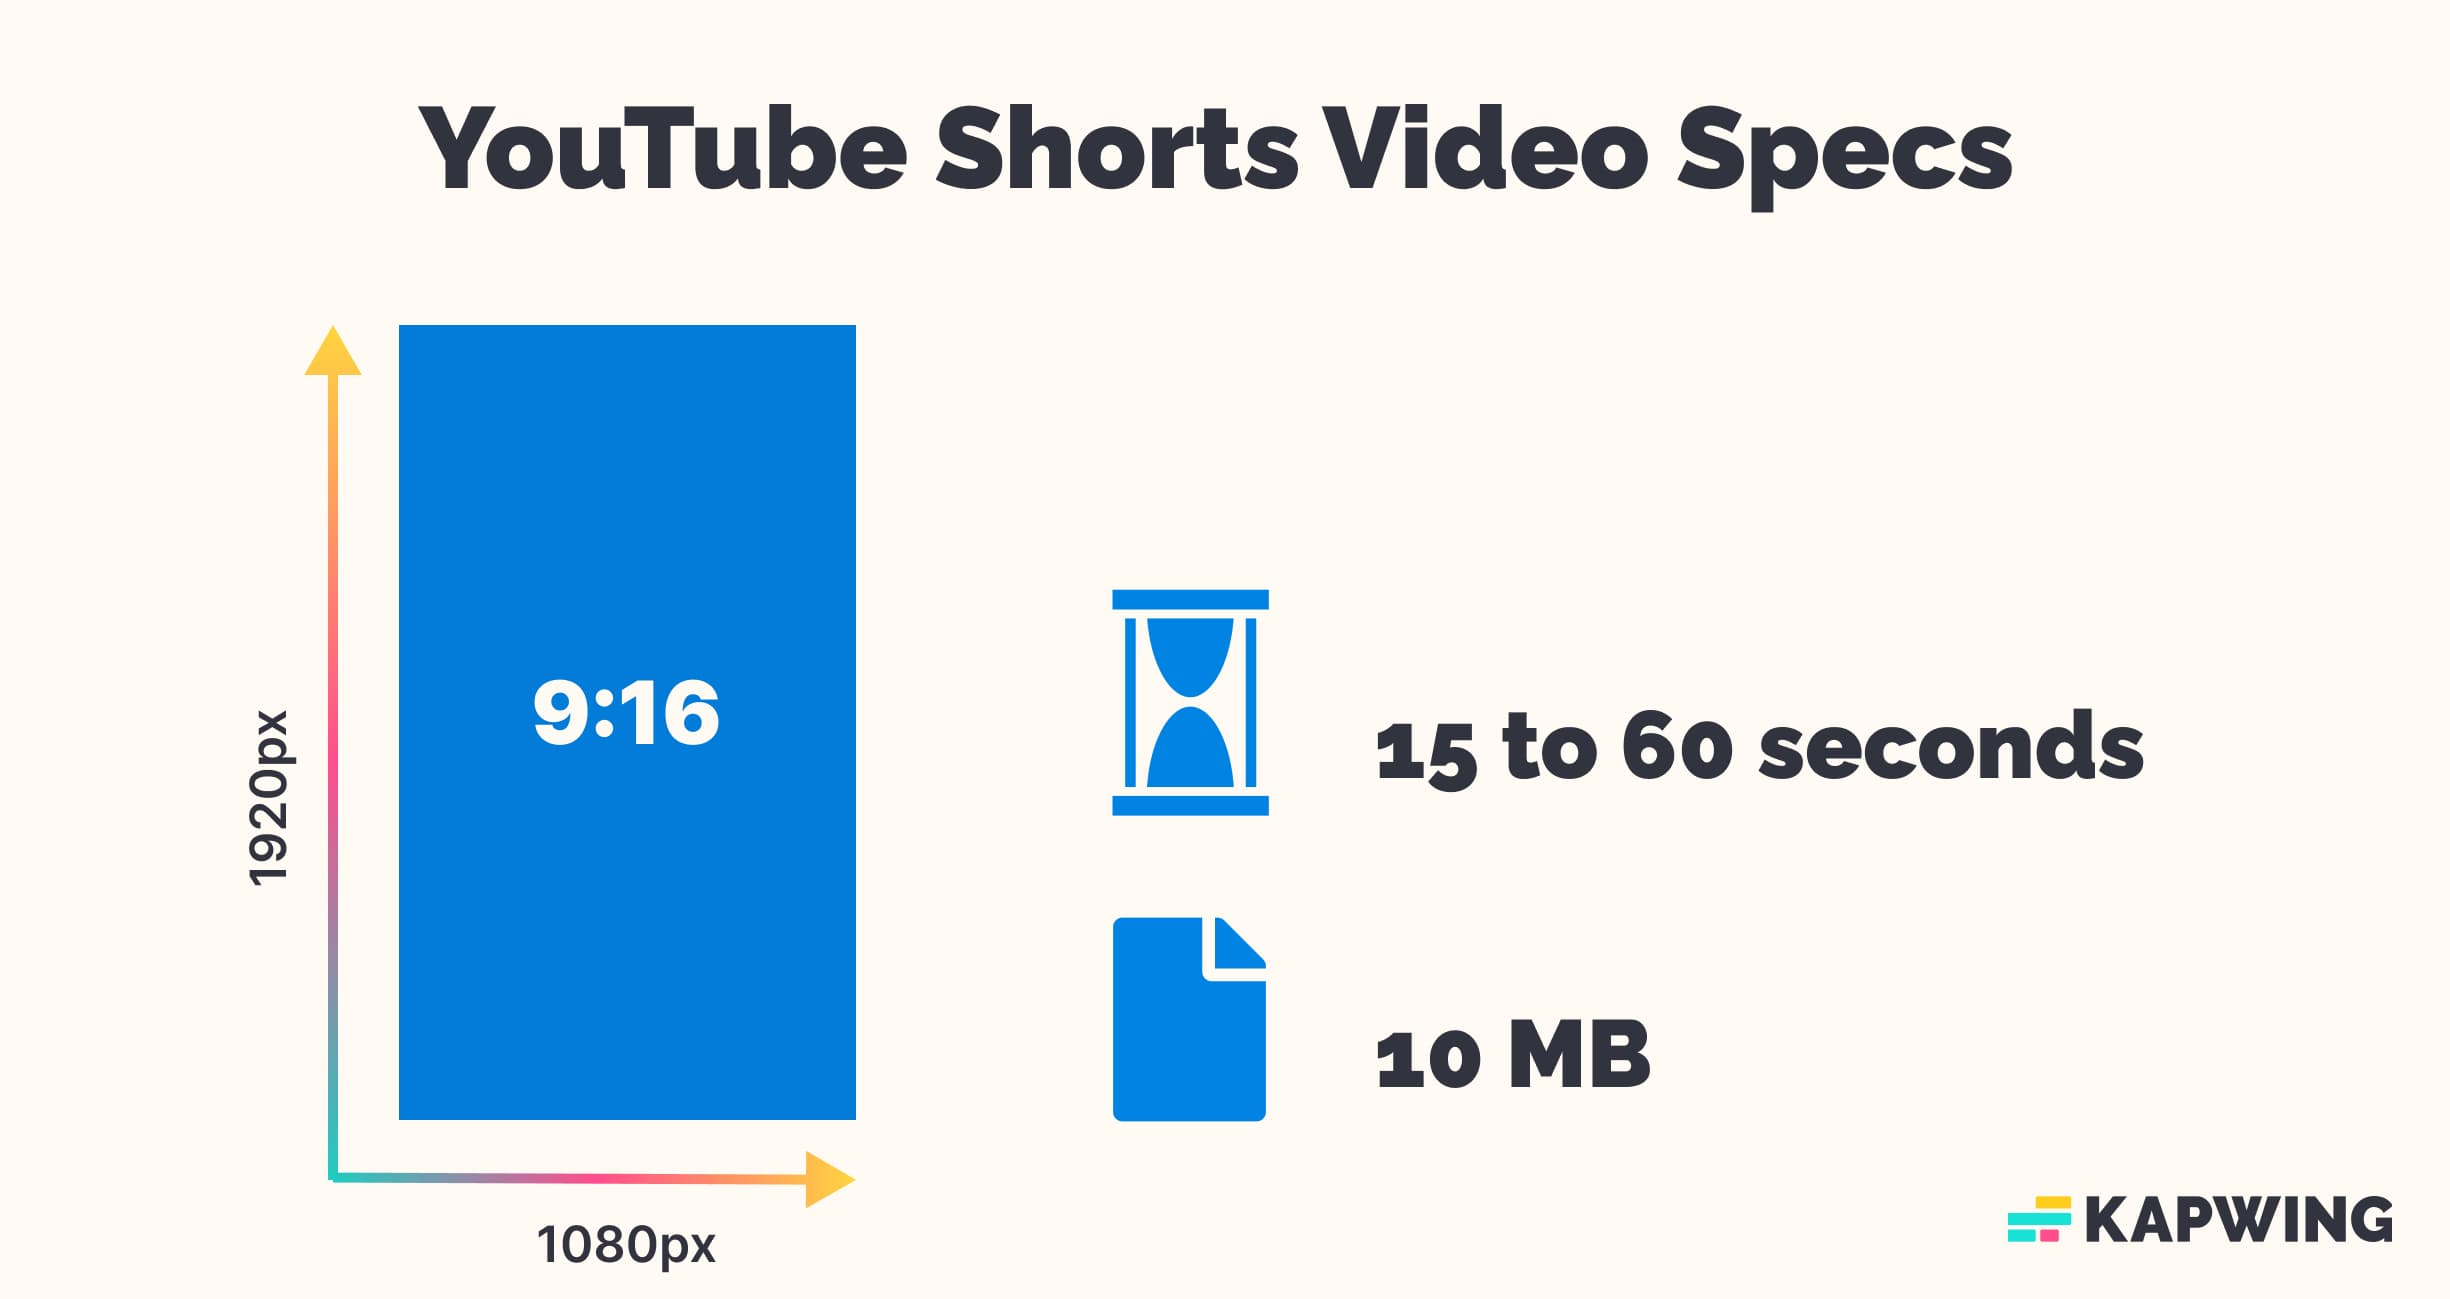 The Ultimate Social Media Video Sizes and Specs Guide